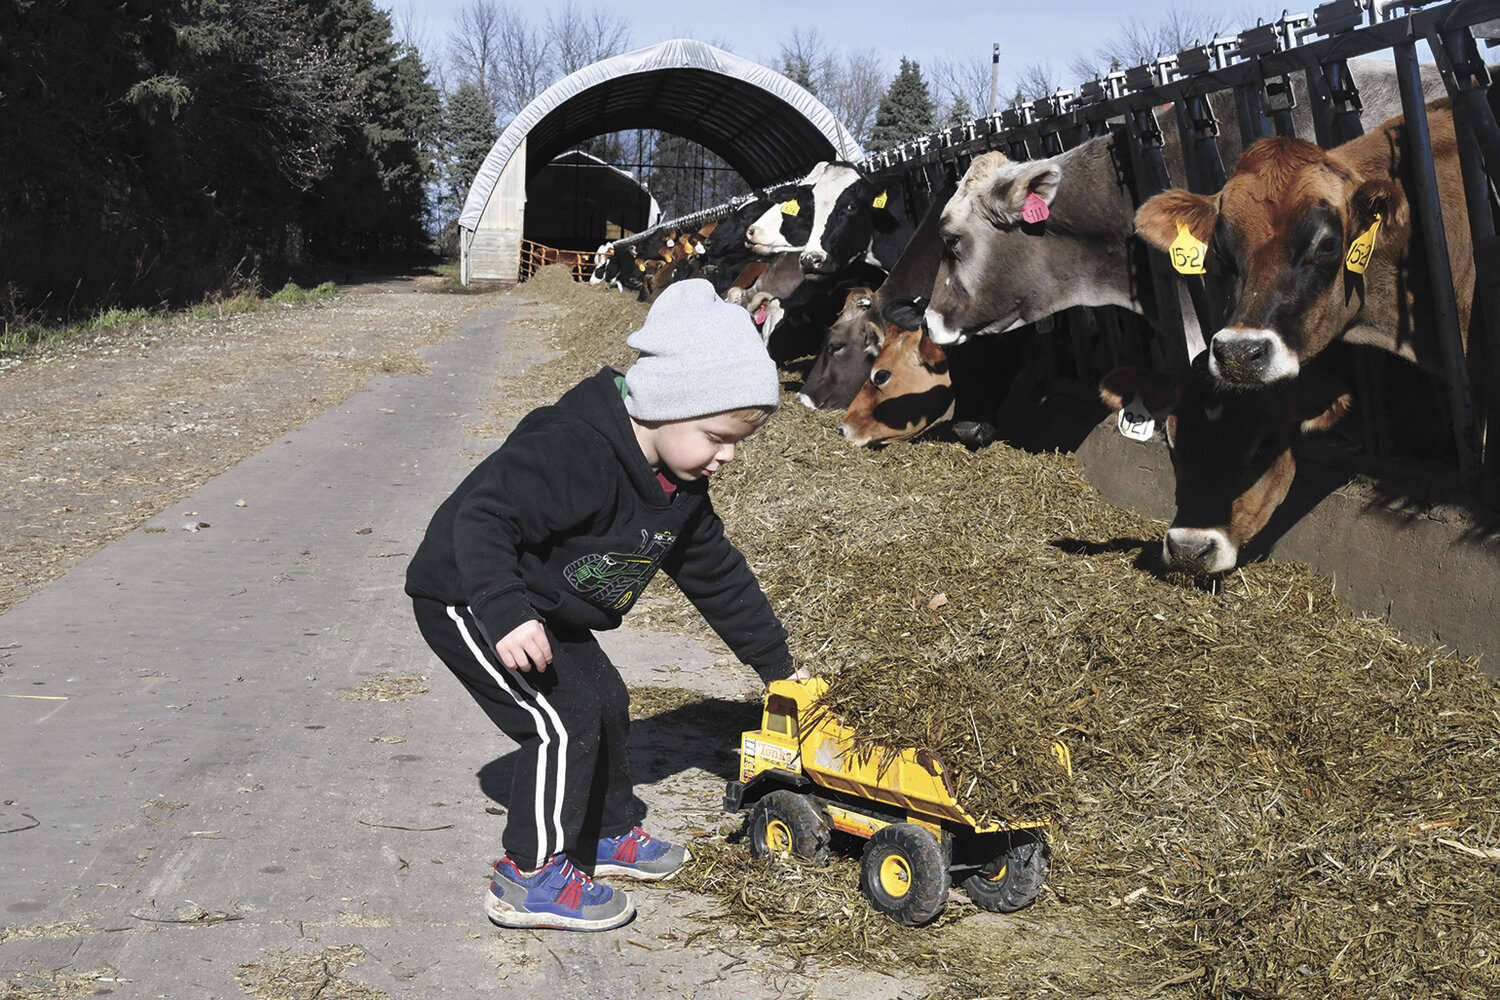 Buckley Fancsali plays with feed and his toy truck Nov. 14 on his family’s farm near Hayfield, Minnesota. The Fancsalis switched the herd they purchased in 2022 from grass to a total mixed ration.